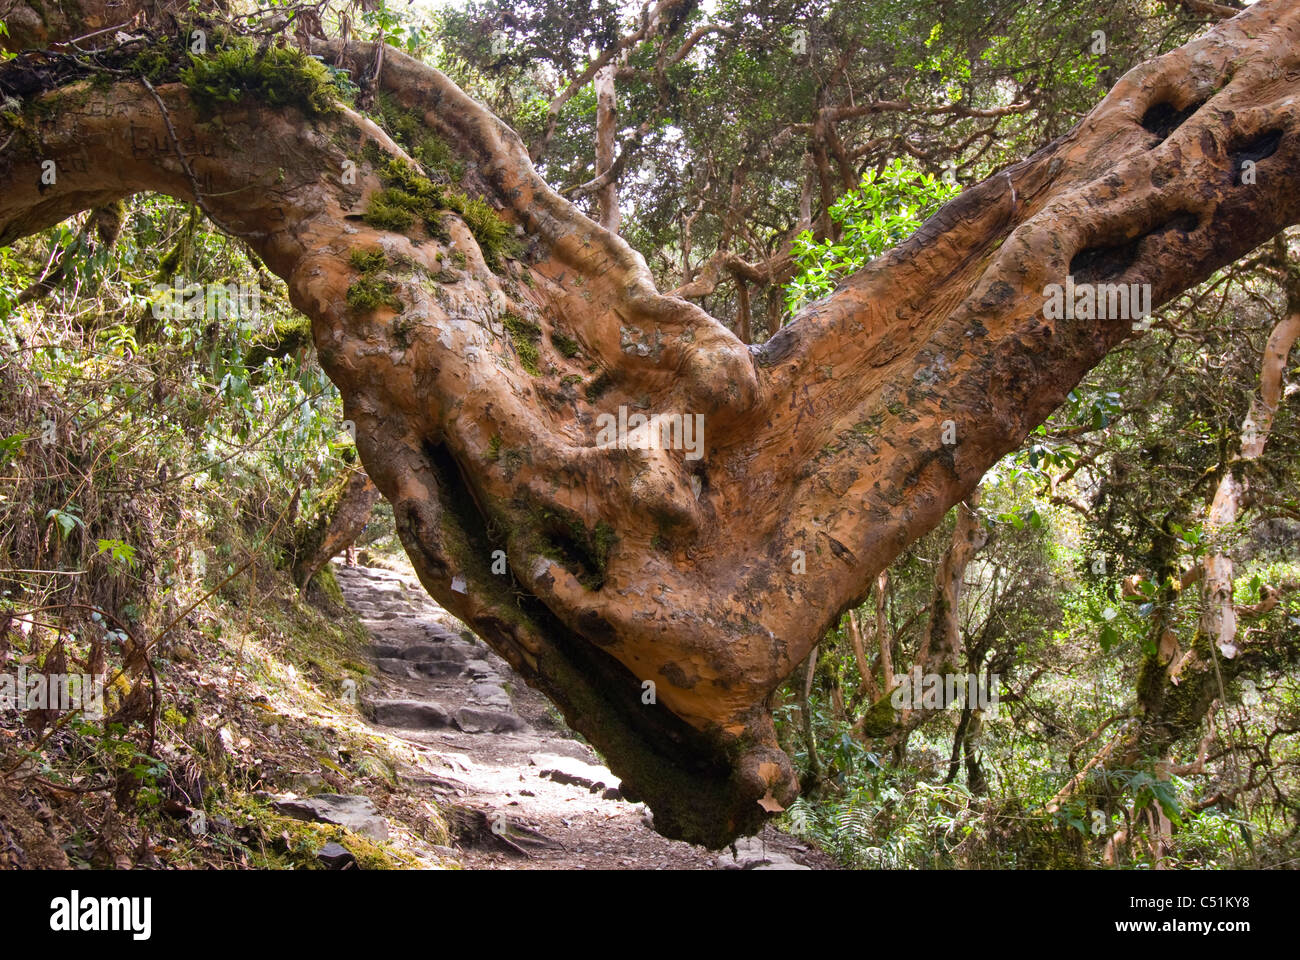 Native and endangered polylepis (Polylepis sp.) woodland along Inca Trail Peru Stock Photo